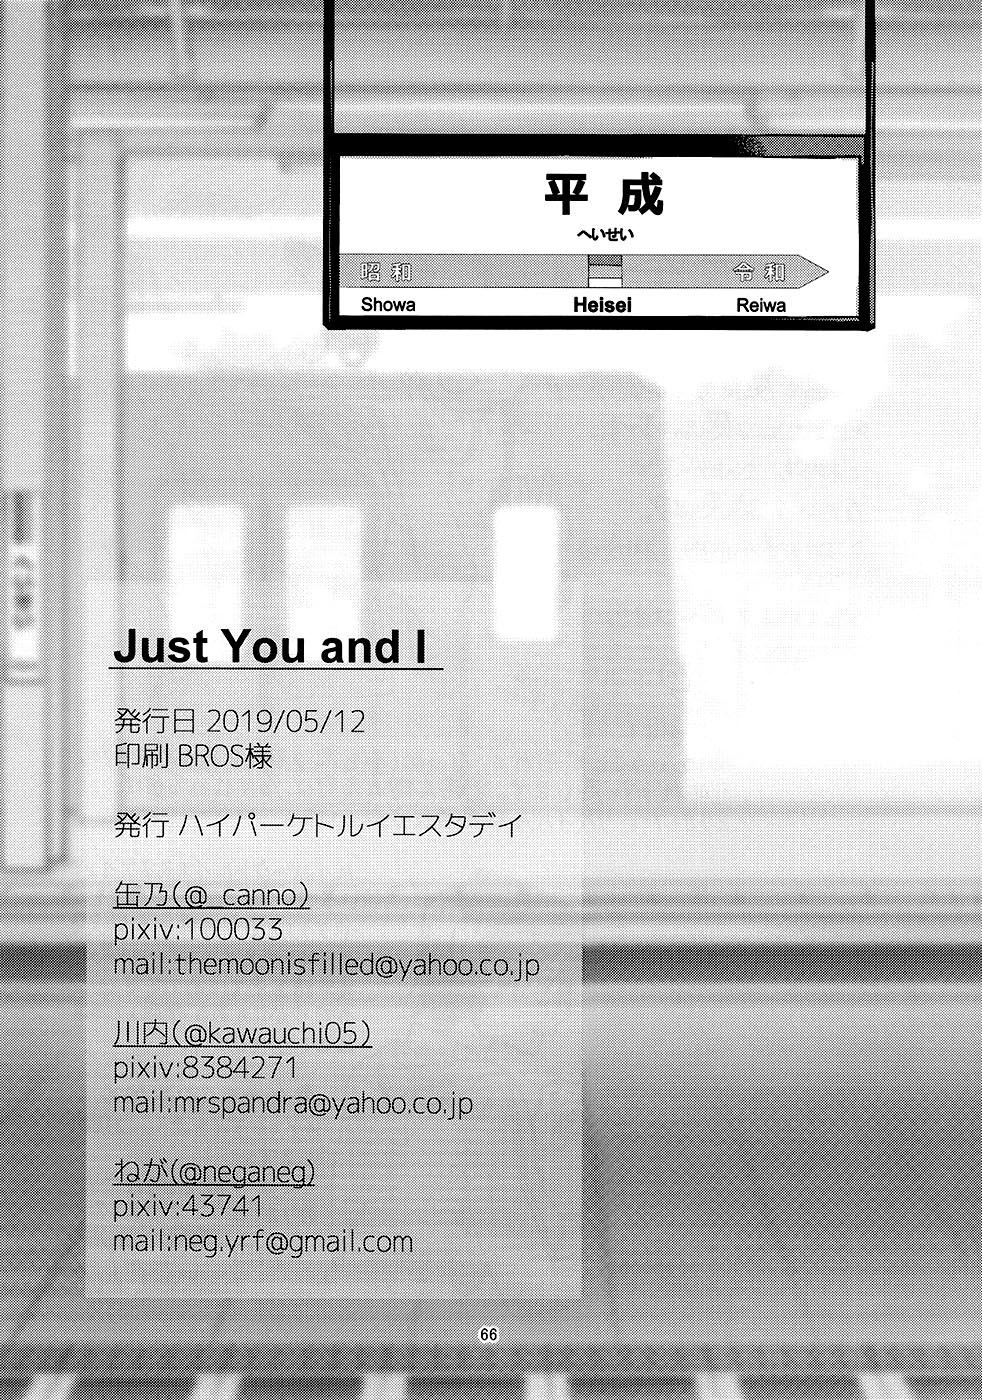 Just You and I Ch. 3 The Meaning of Us